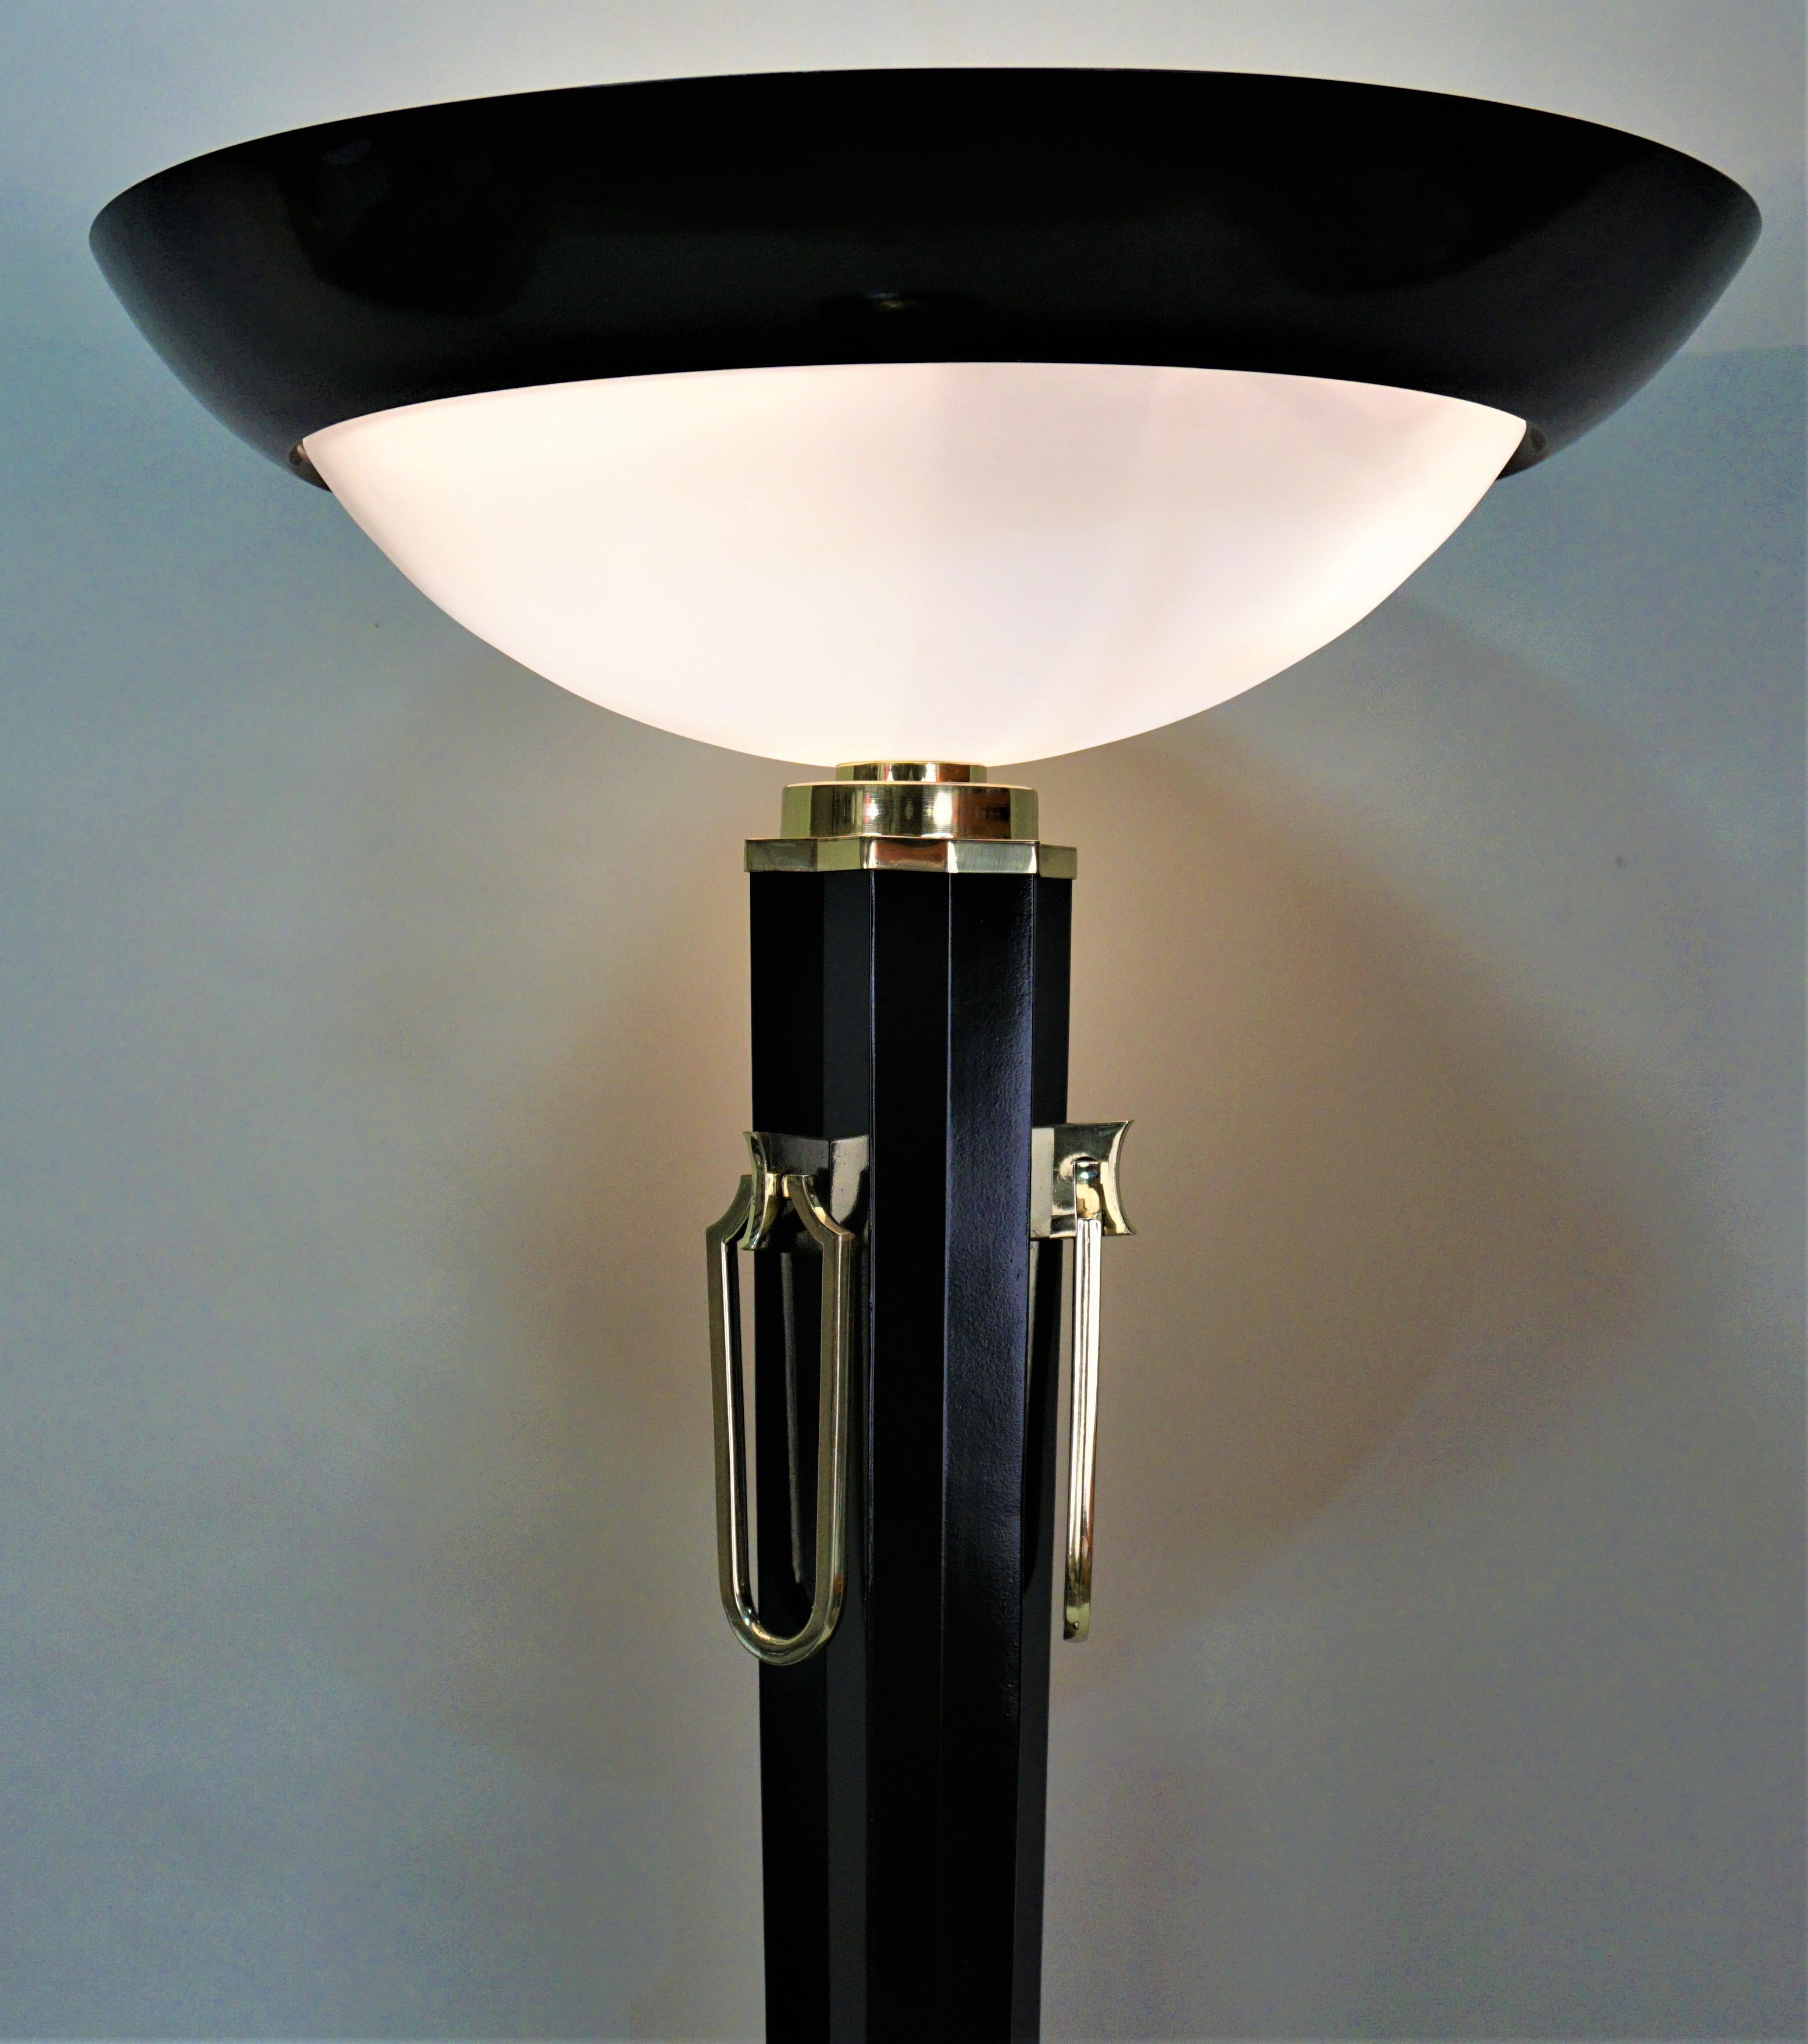 Black combination of polished bronze and lacquered bronze base Art Deco floor lamp with Frost glass shade.
This impressive large torchiere floor lamp measures 21.5